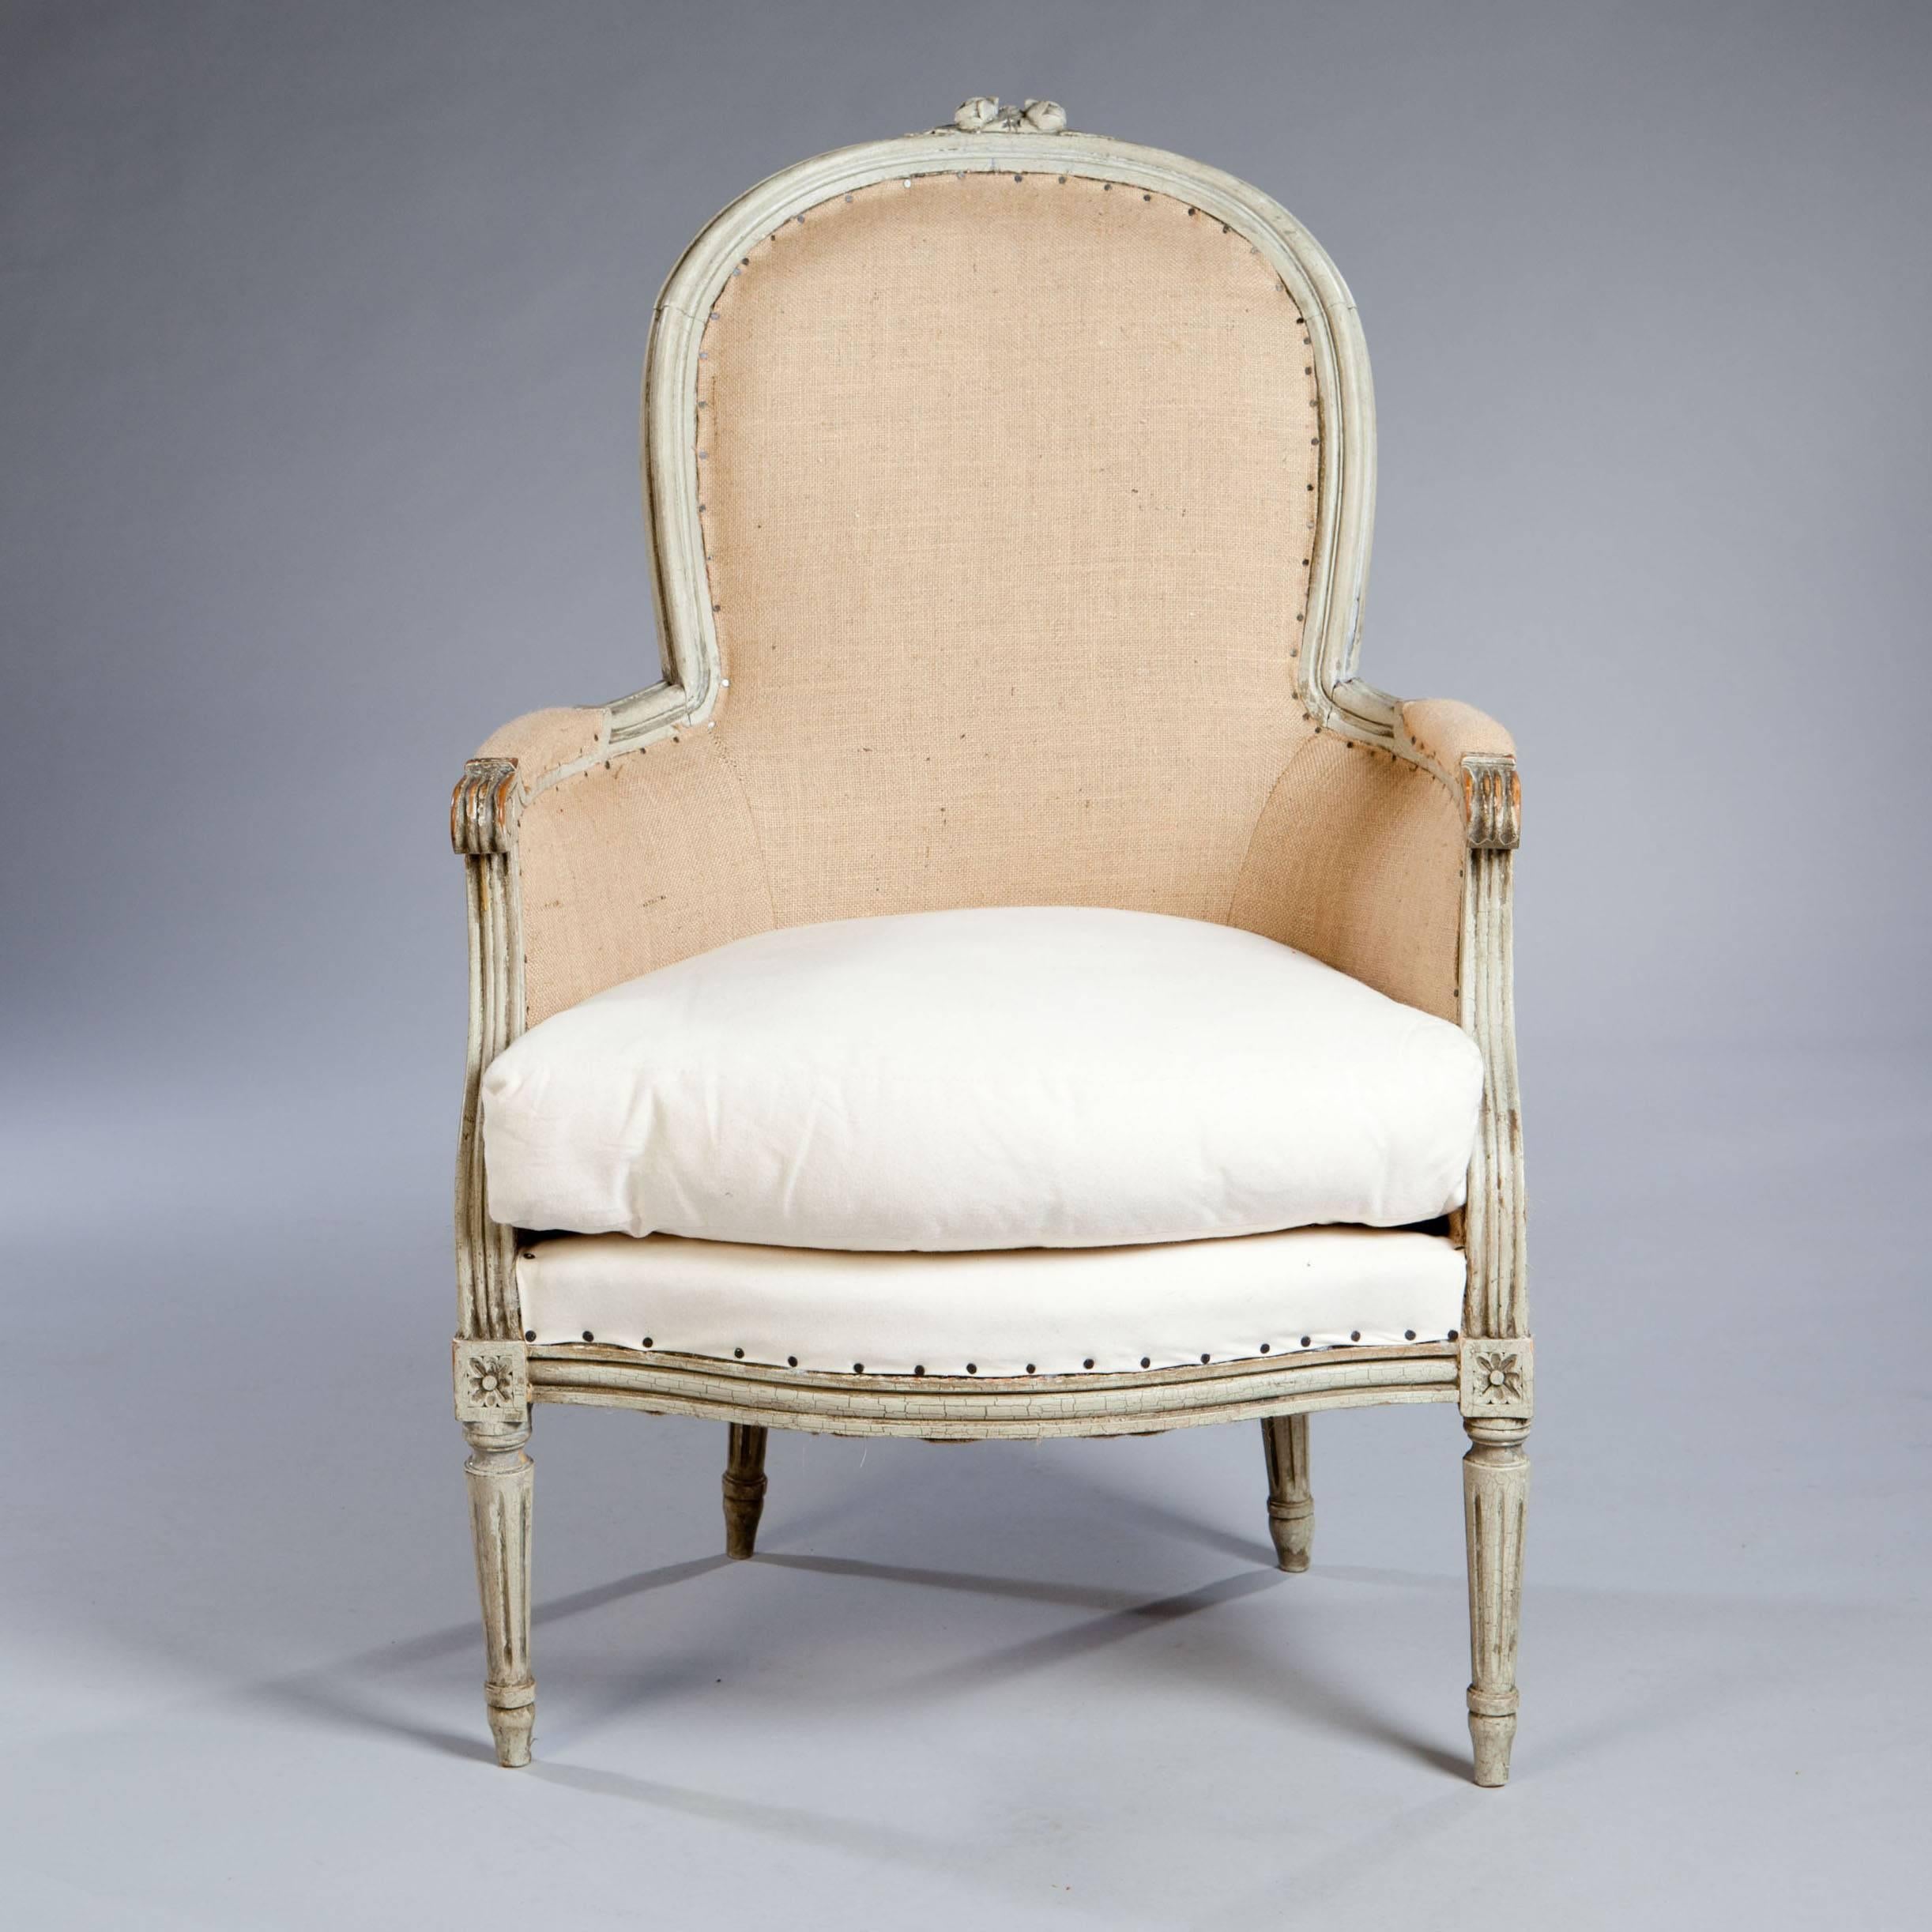 A Fine Pair of French Neoclassical Bergere Armchairs In Excellent Condition In London, by appointment only